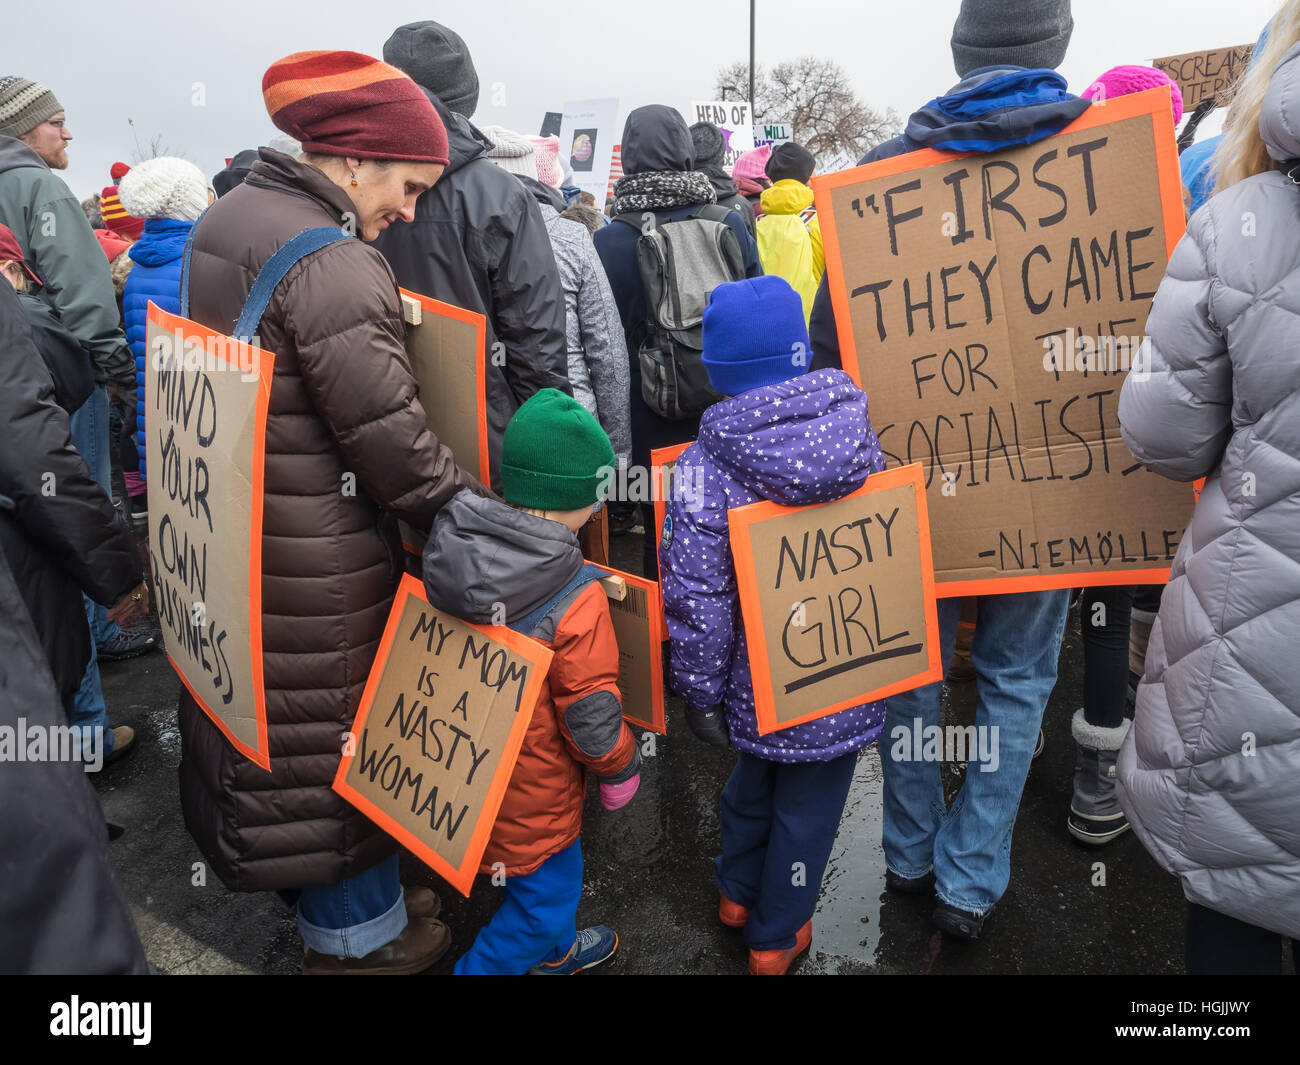 Saint Paul, Minnesota, USA. 21st January, 2017. A family participating in the Women's March wears a variety of political signs in St Paul, Minnesota. Cindy Carlsson/Alamy Live News Stock Photo